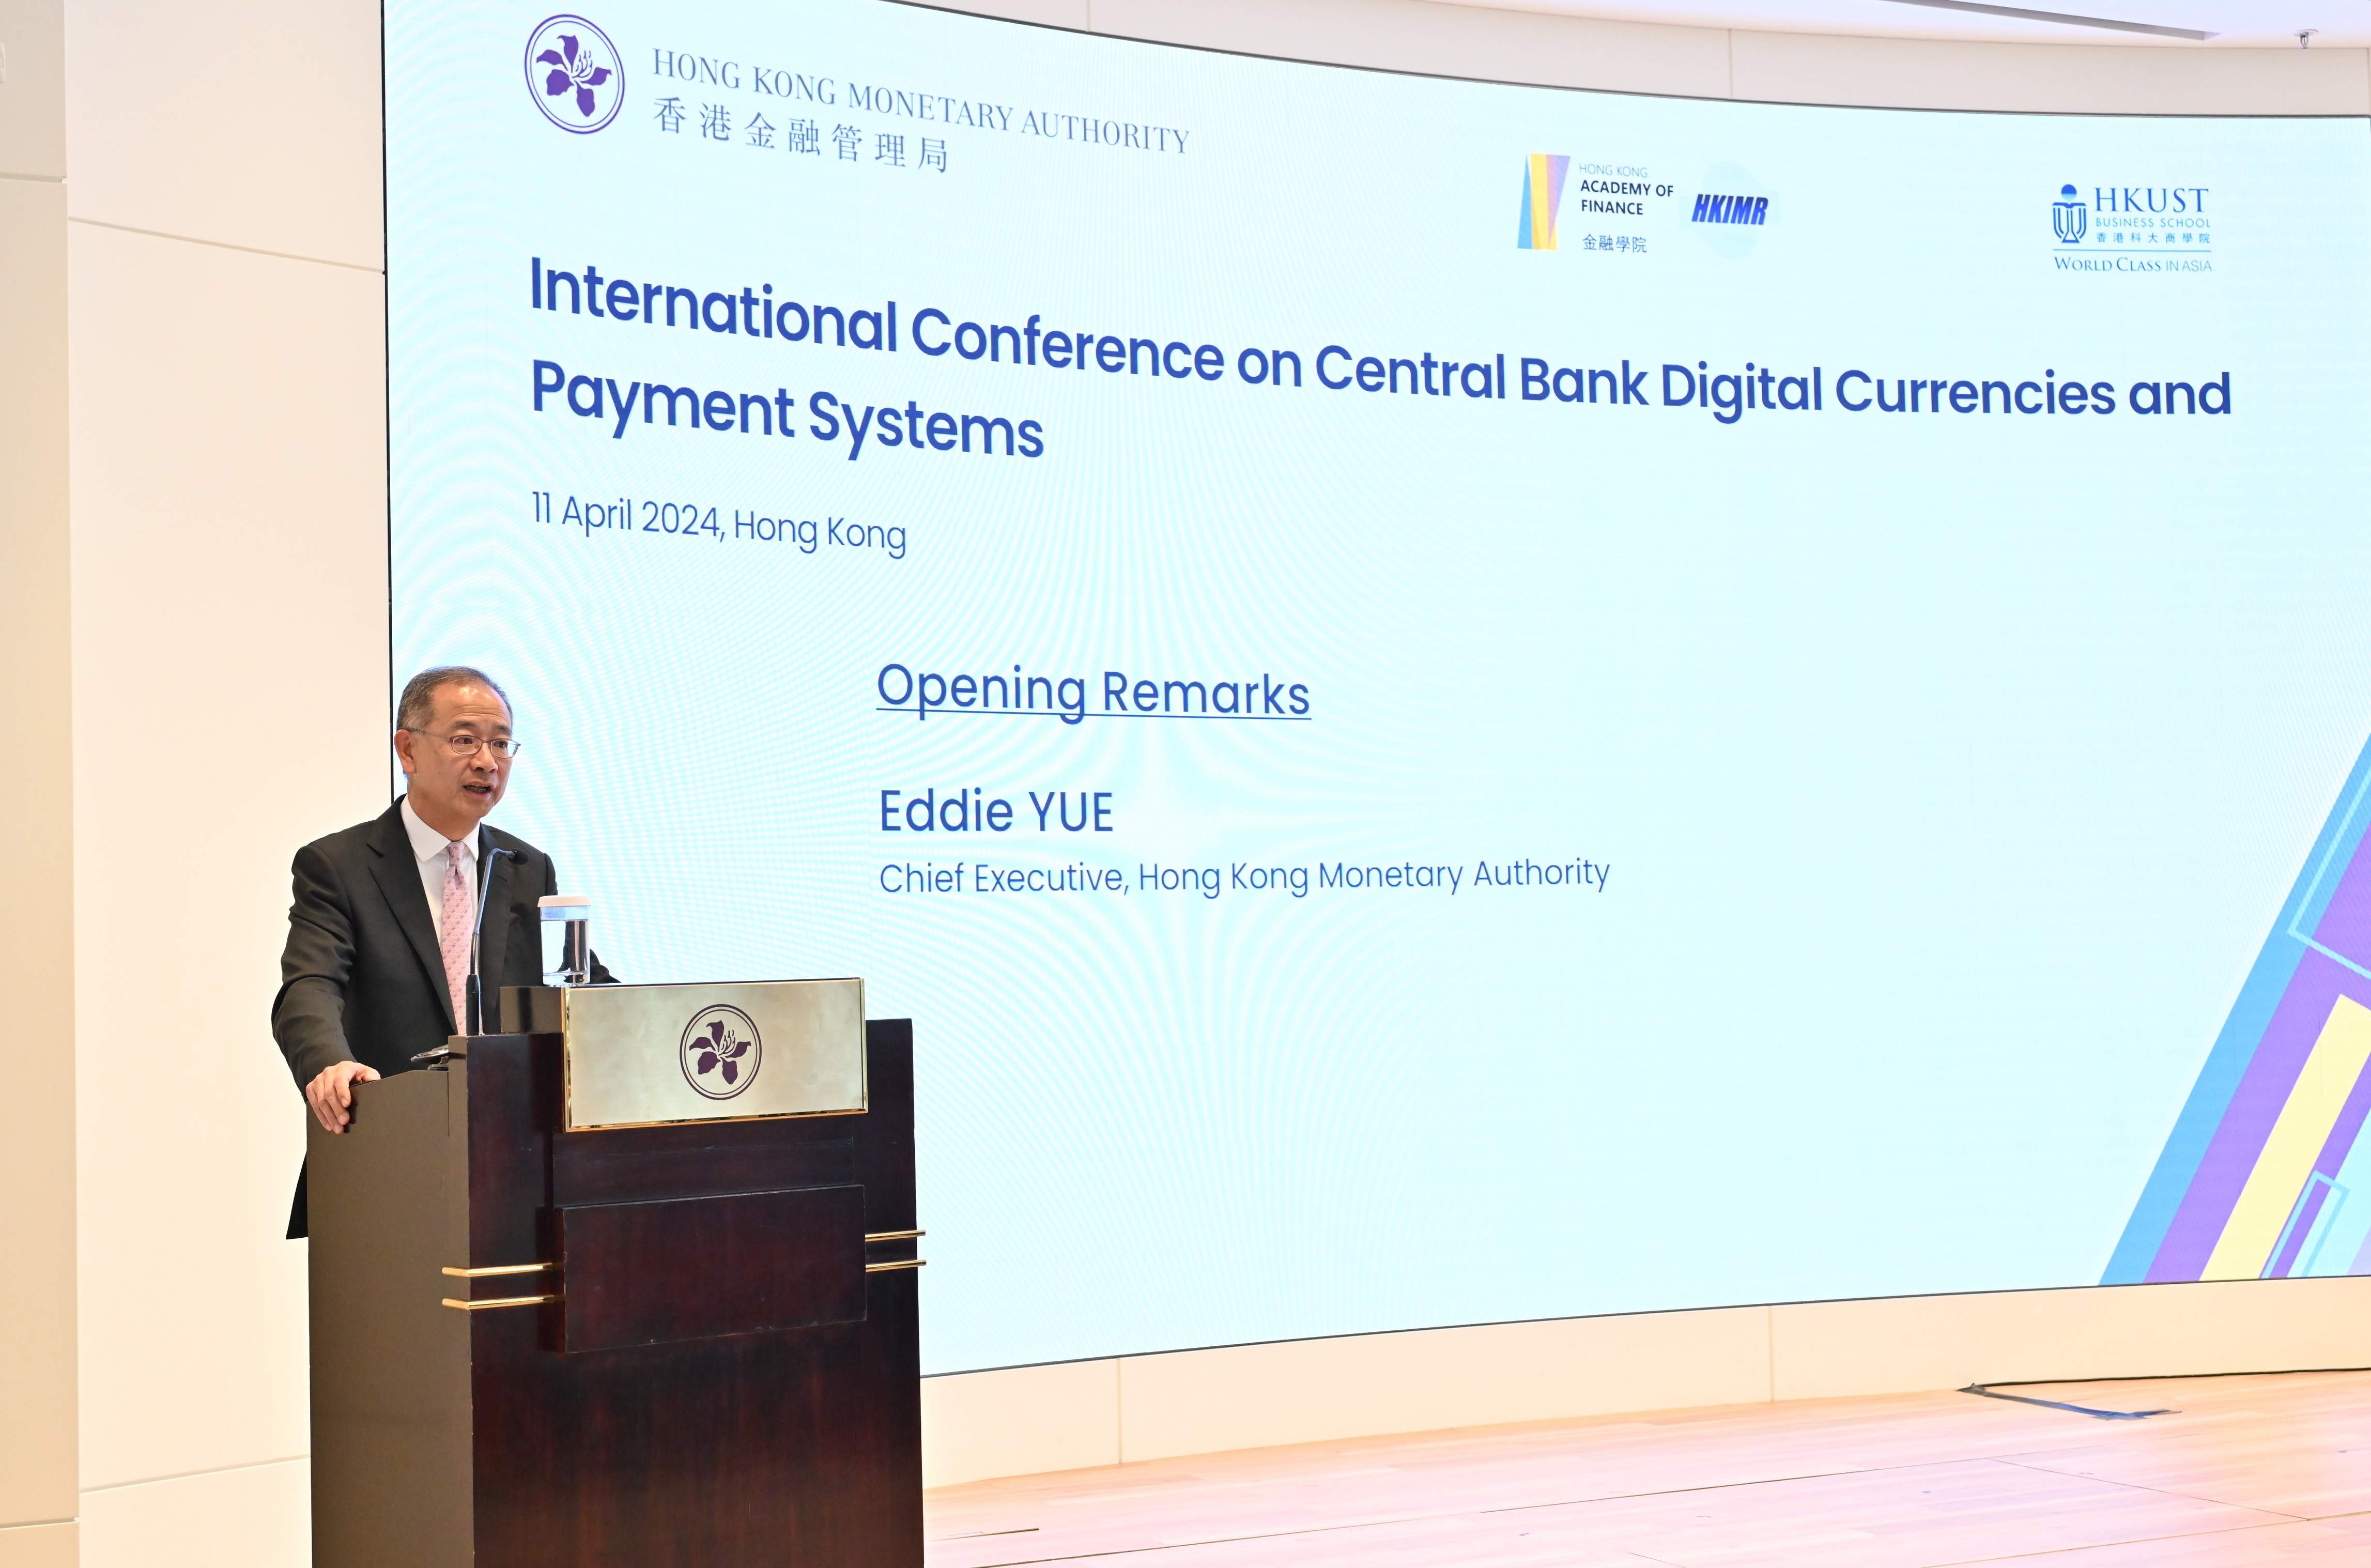 Mr Eddie Yue, Chief Executive of the Hong Kong Monetary Authority, delivers a keynote speech at the International Conference on Central Bank Digital Currencies and Payment Systems.